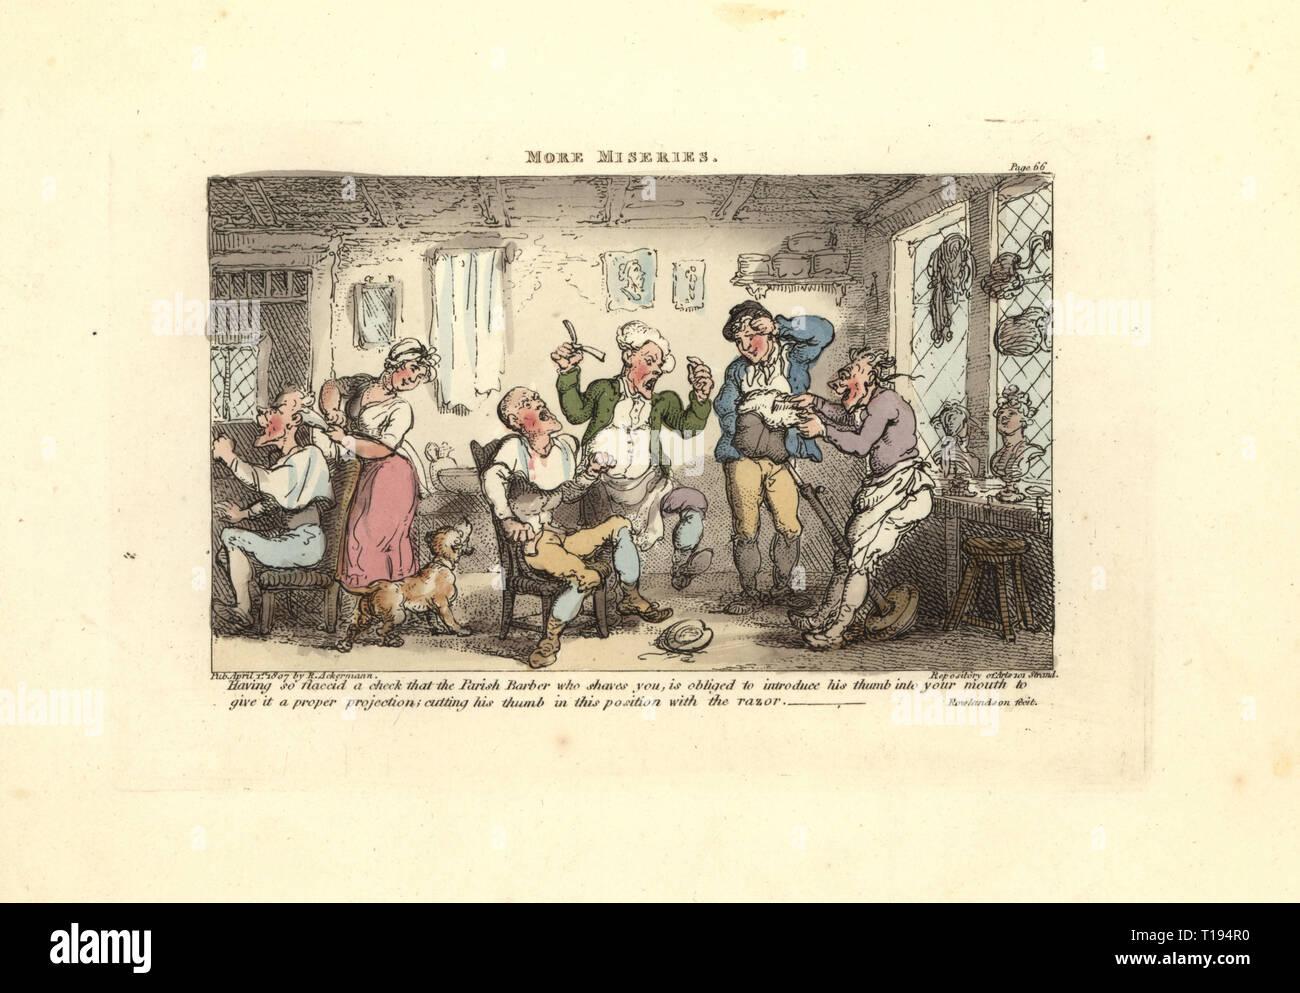 Barber cutting his thumb with a razor trying to shave a customer with soft cheeks. More Miseries. Handcoloured copperplate engraving designed and etched by Thomas Rowlandson to accompany Reverend James Beresford’s Miseries of Human Life, Ackermann, 1808. Stock Photo